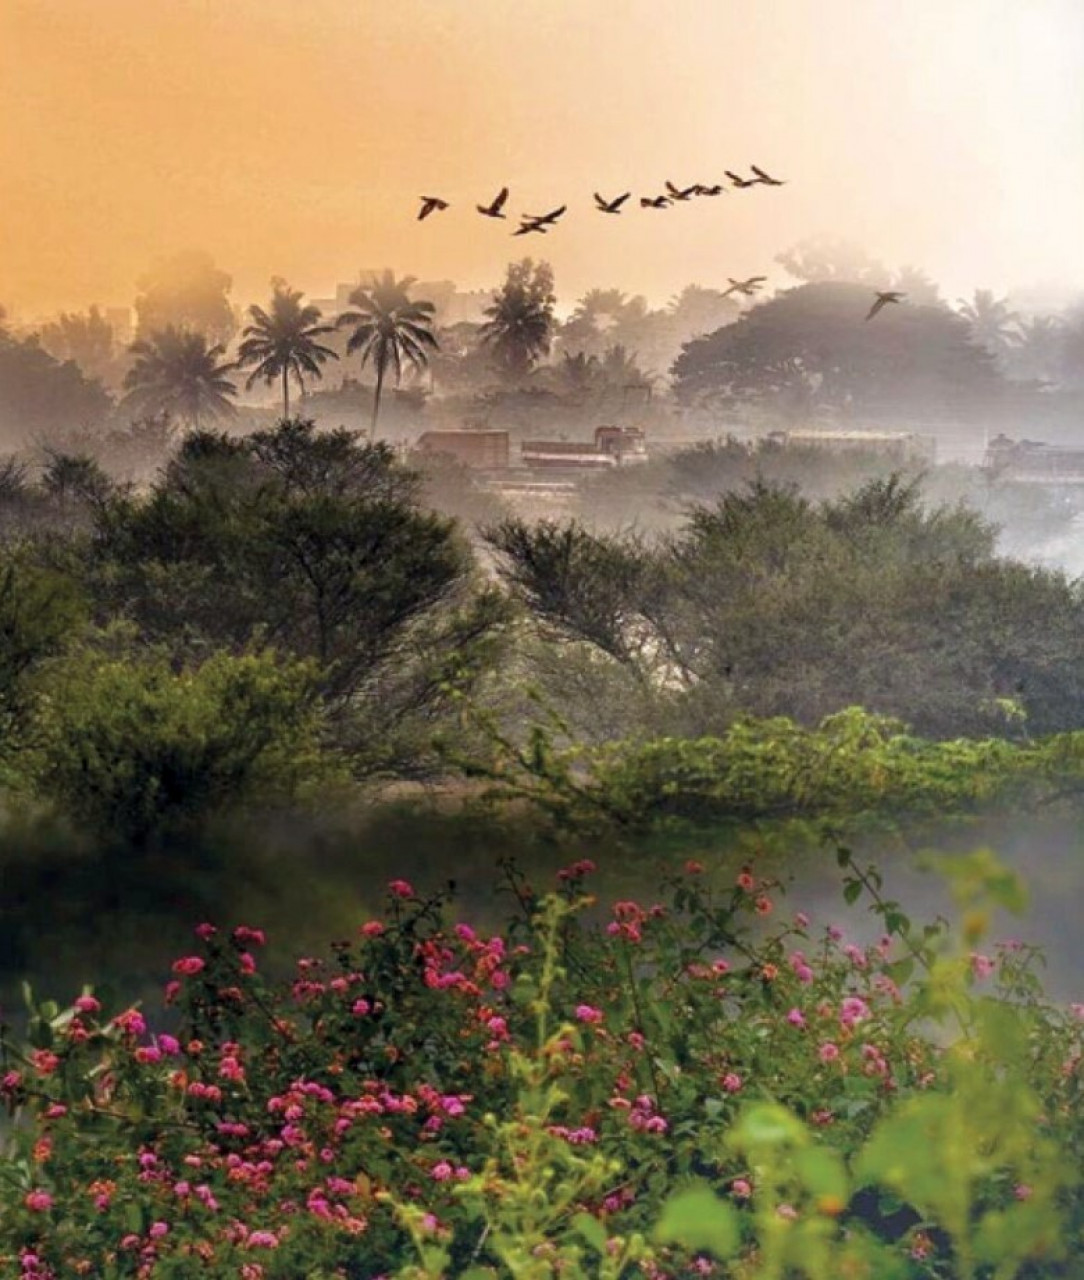 A misty winter morning in Bangalore, India. (Image - Soumika Dutta Singh)